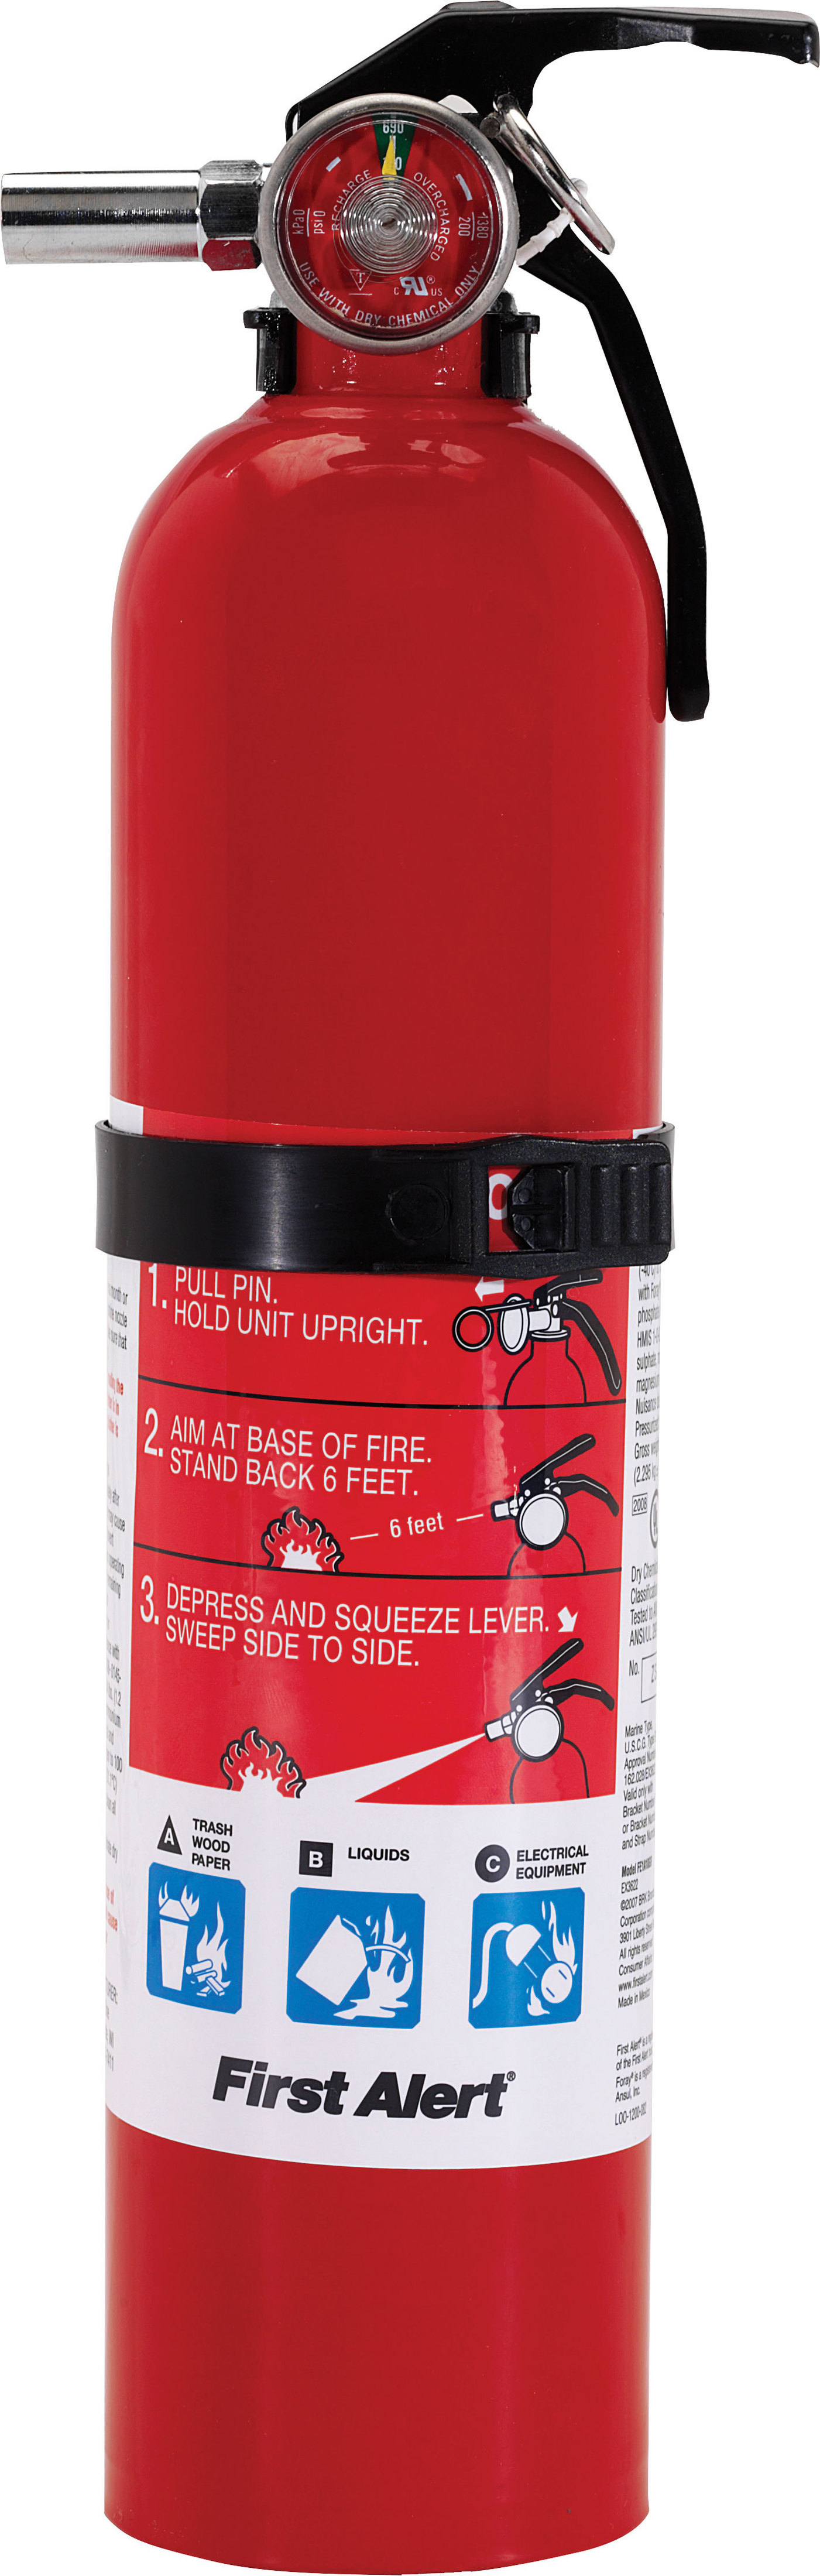 Pro 2-5 Fire Extinguisher Red 2.5 Lb. - UL rated 1-A, 10-B:C - Click Image to Close